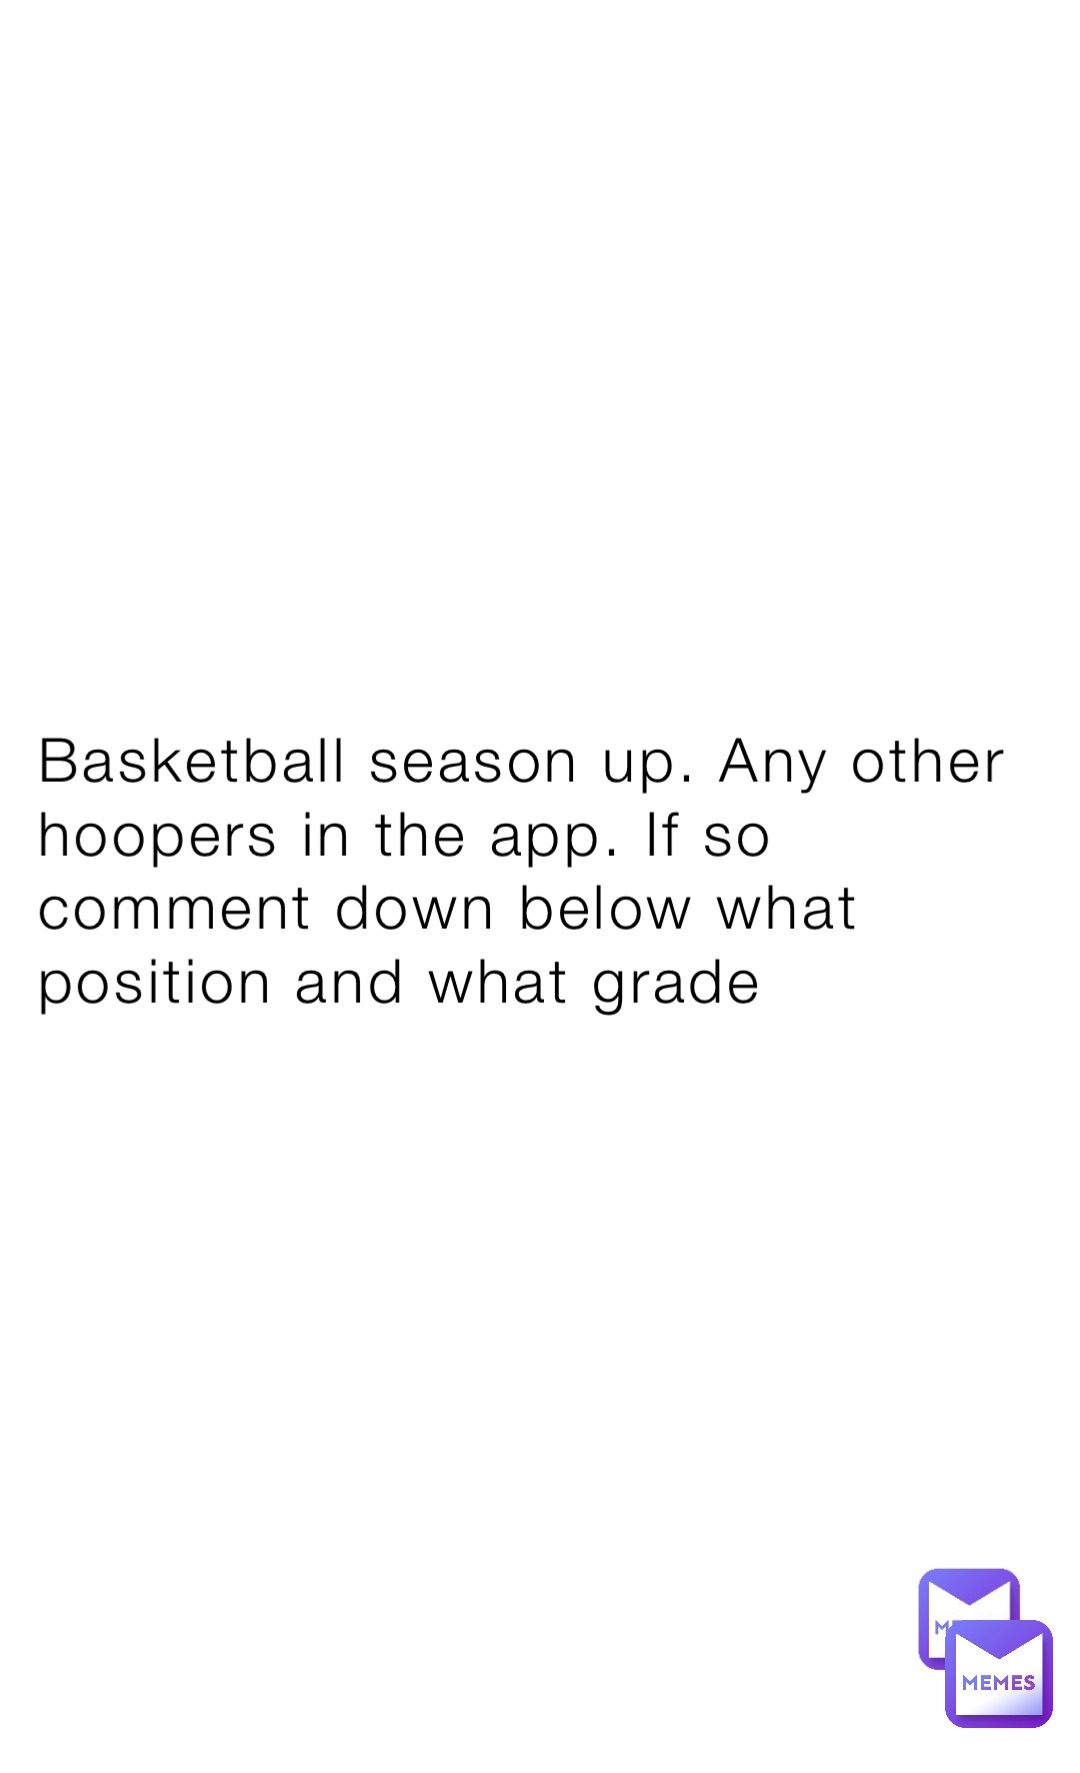 Basketball season up. Any other hoopers in the app. If so comment down below what position and what grade